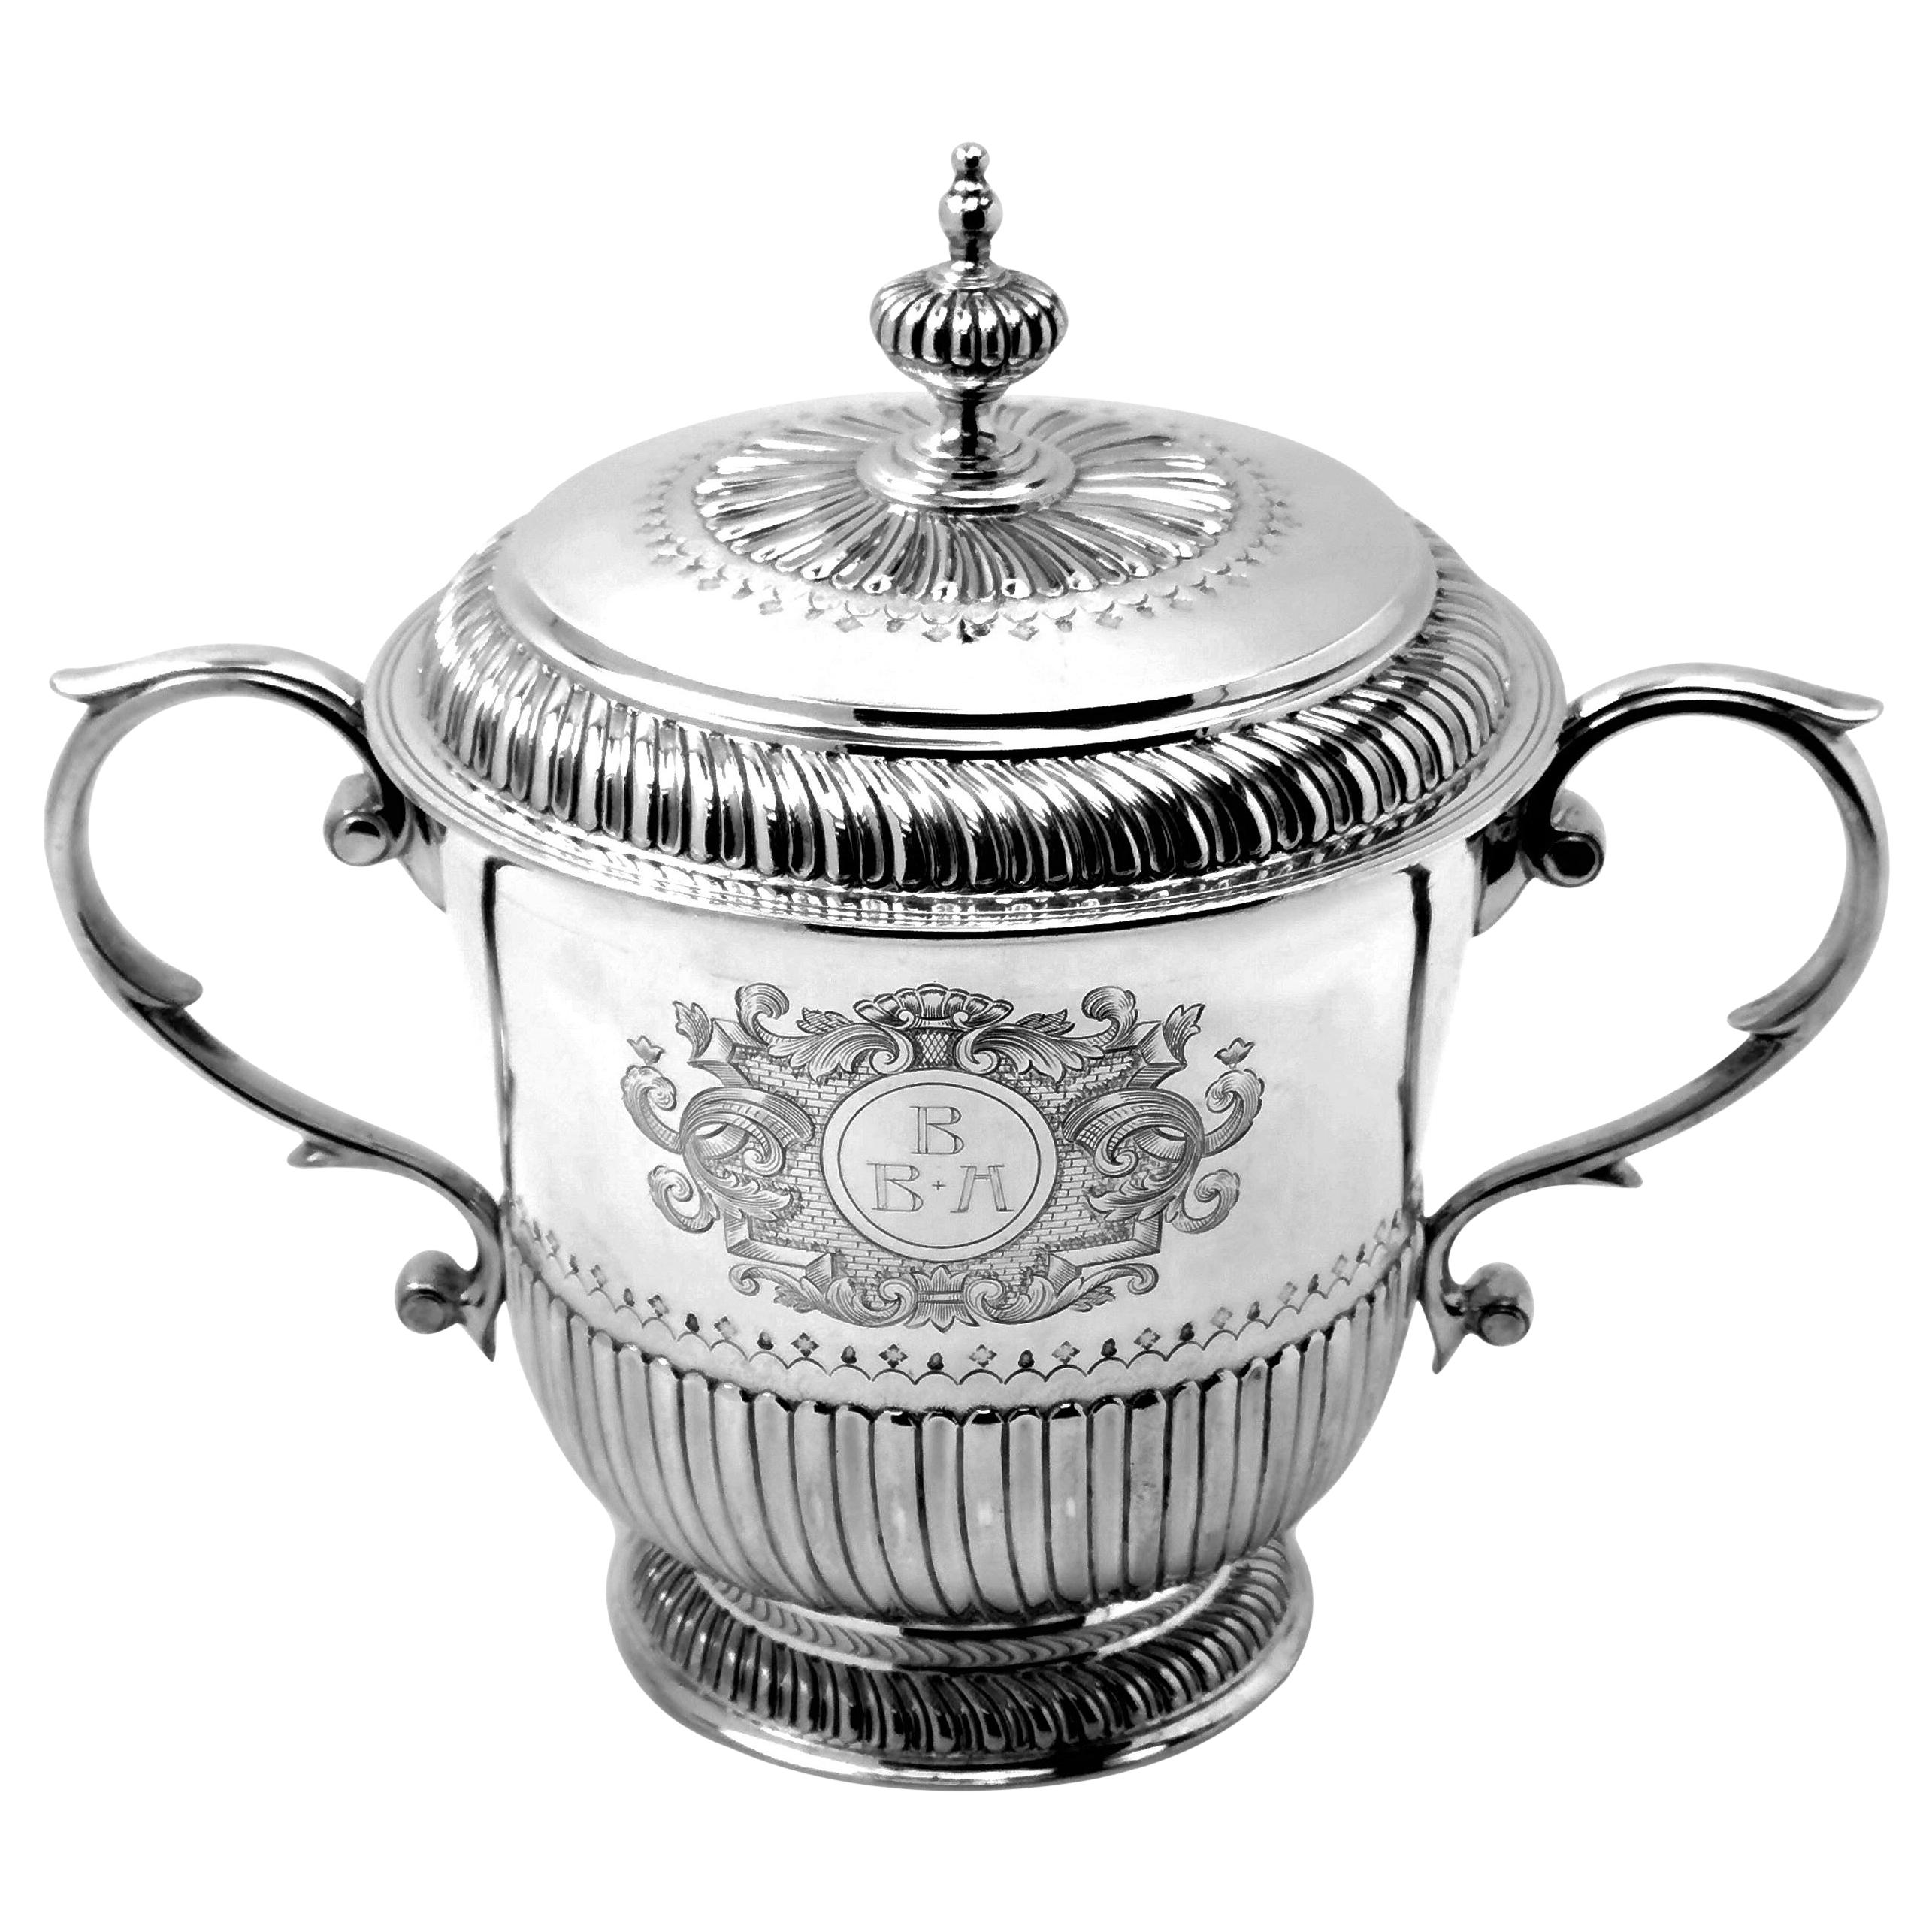 Antique Silver Lidded Porringer Cup & Cover 1911 William III 17th Century Style